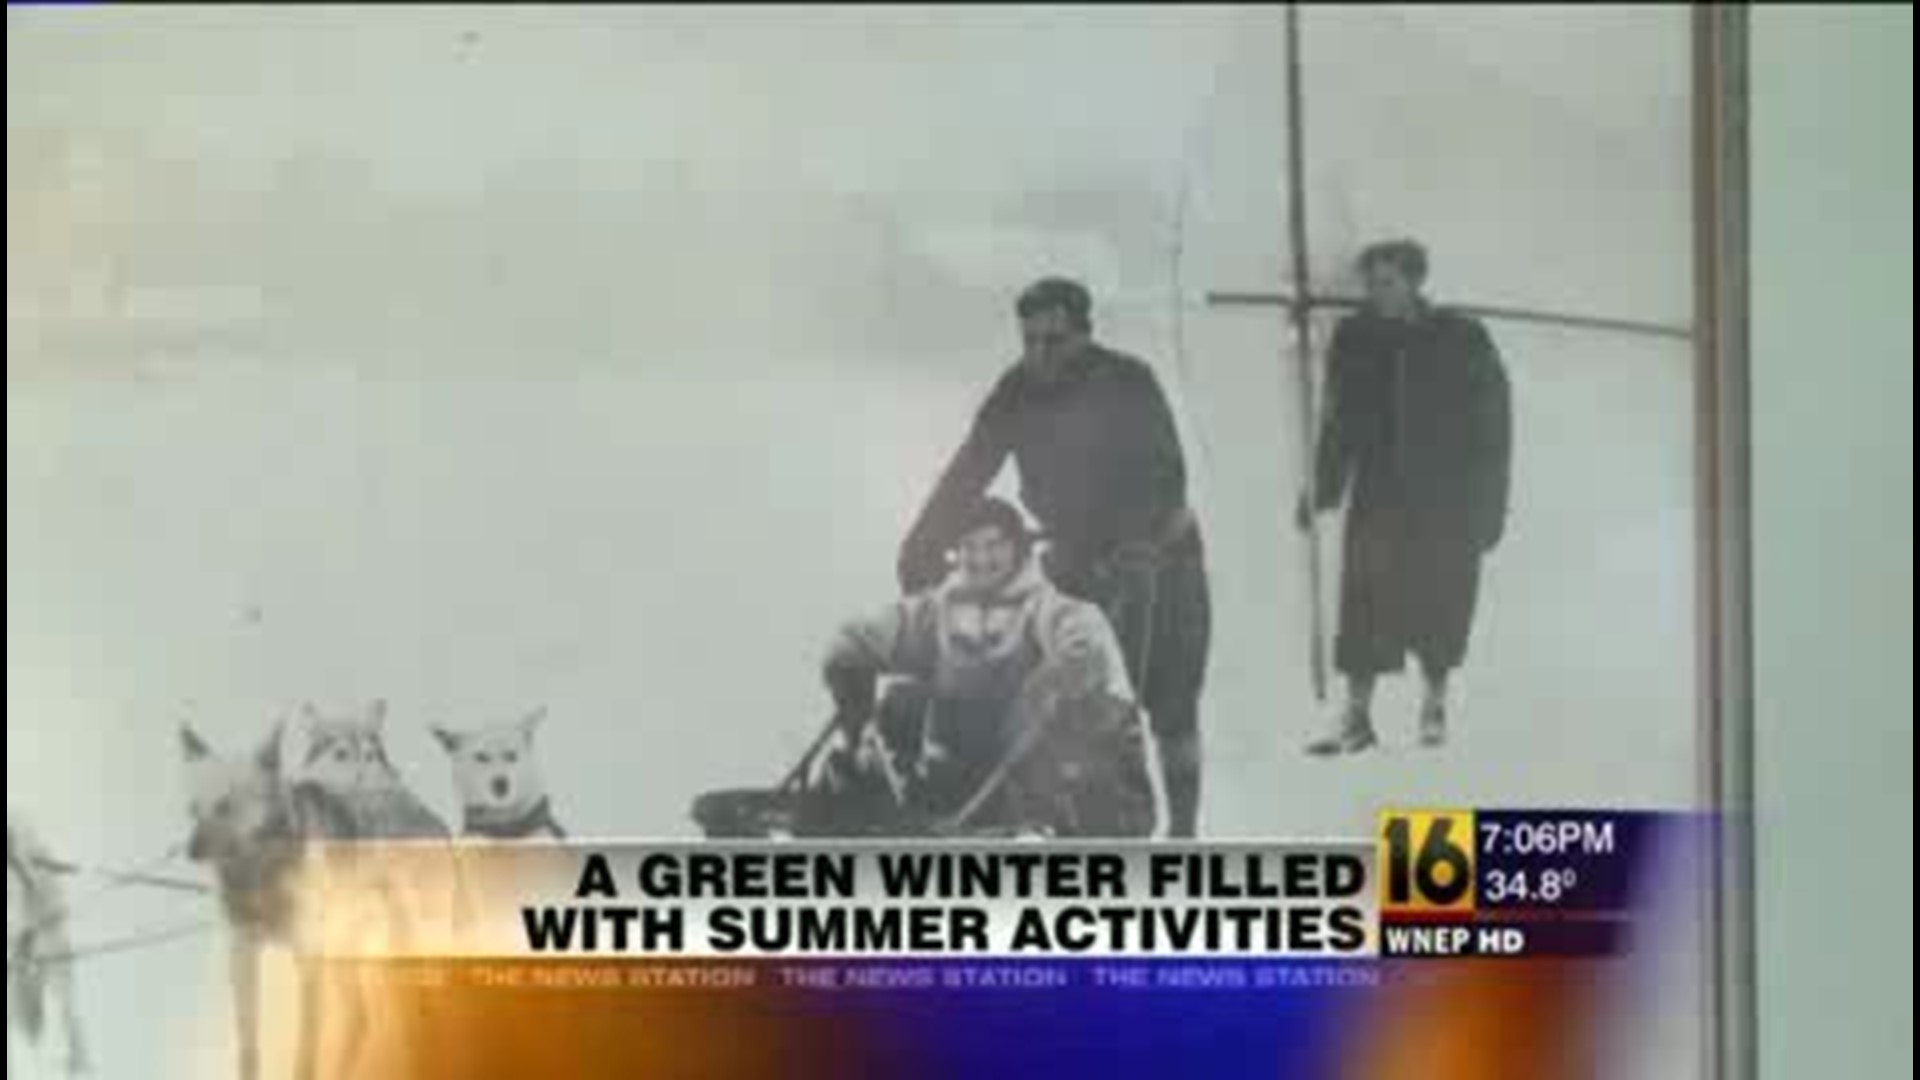 A Green Winter Filled with Summer Activities